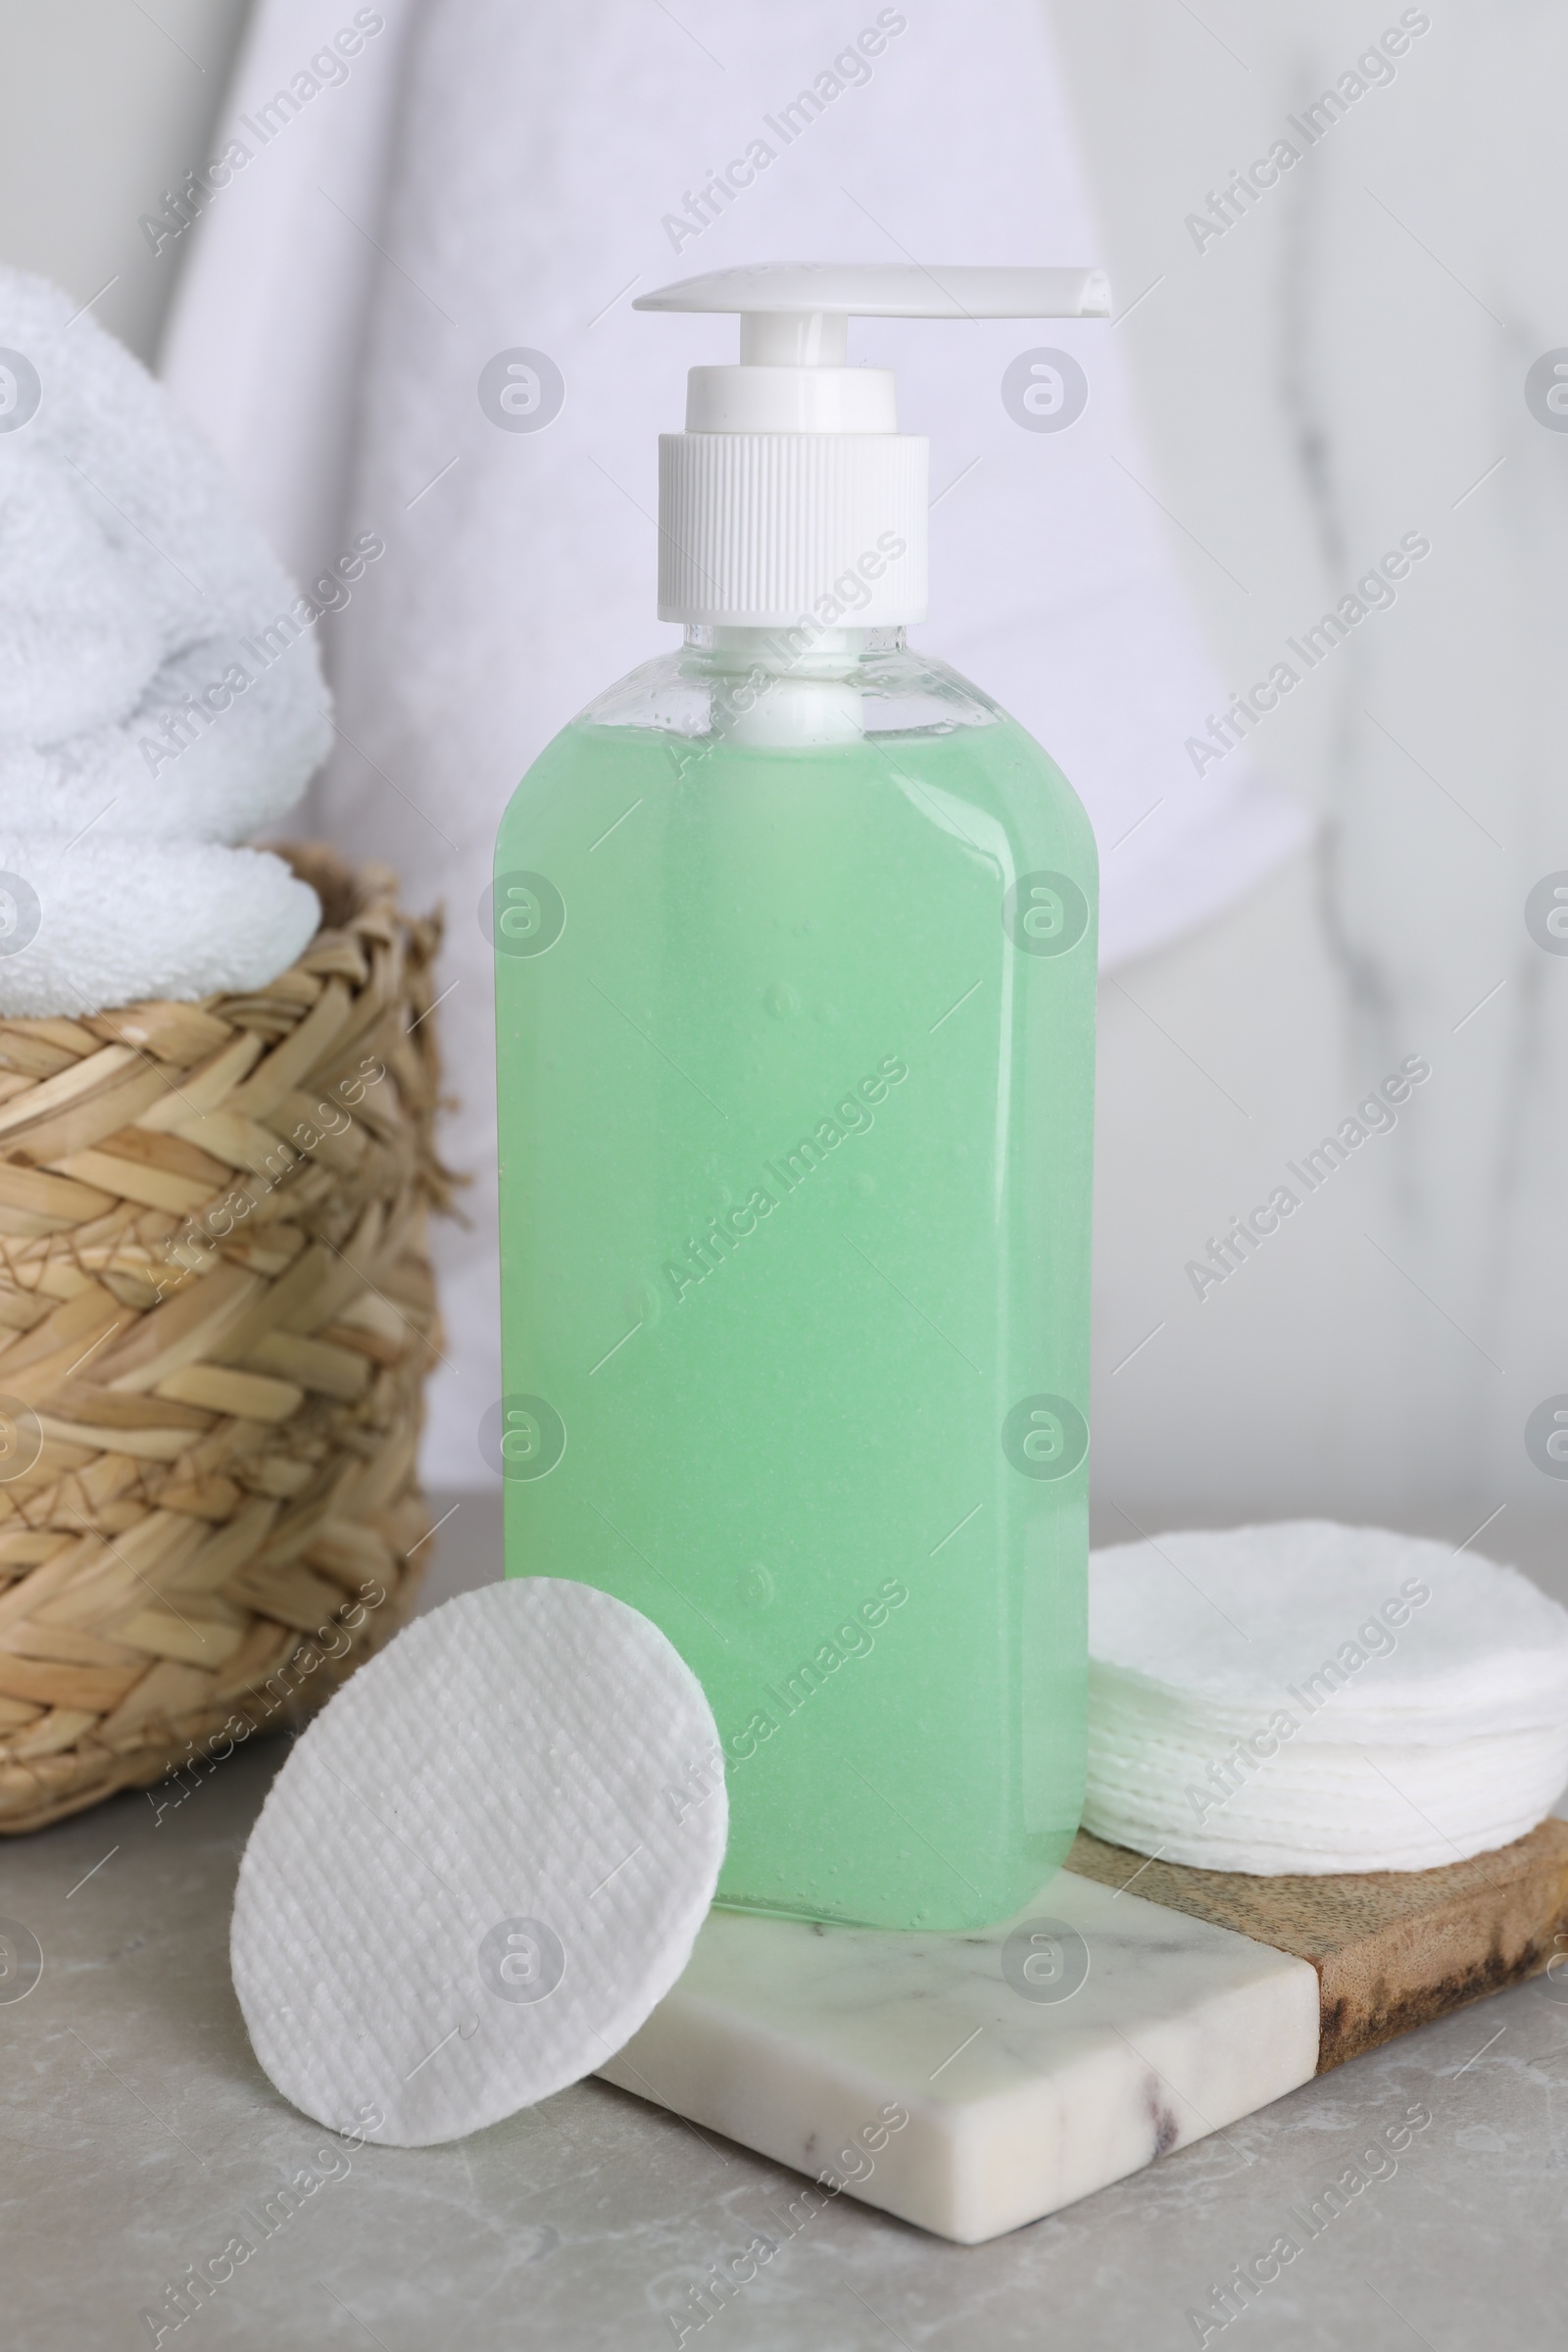 Photo of Bottle of face cleansing product and cotton pads on light grey table